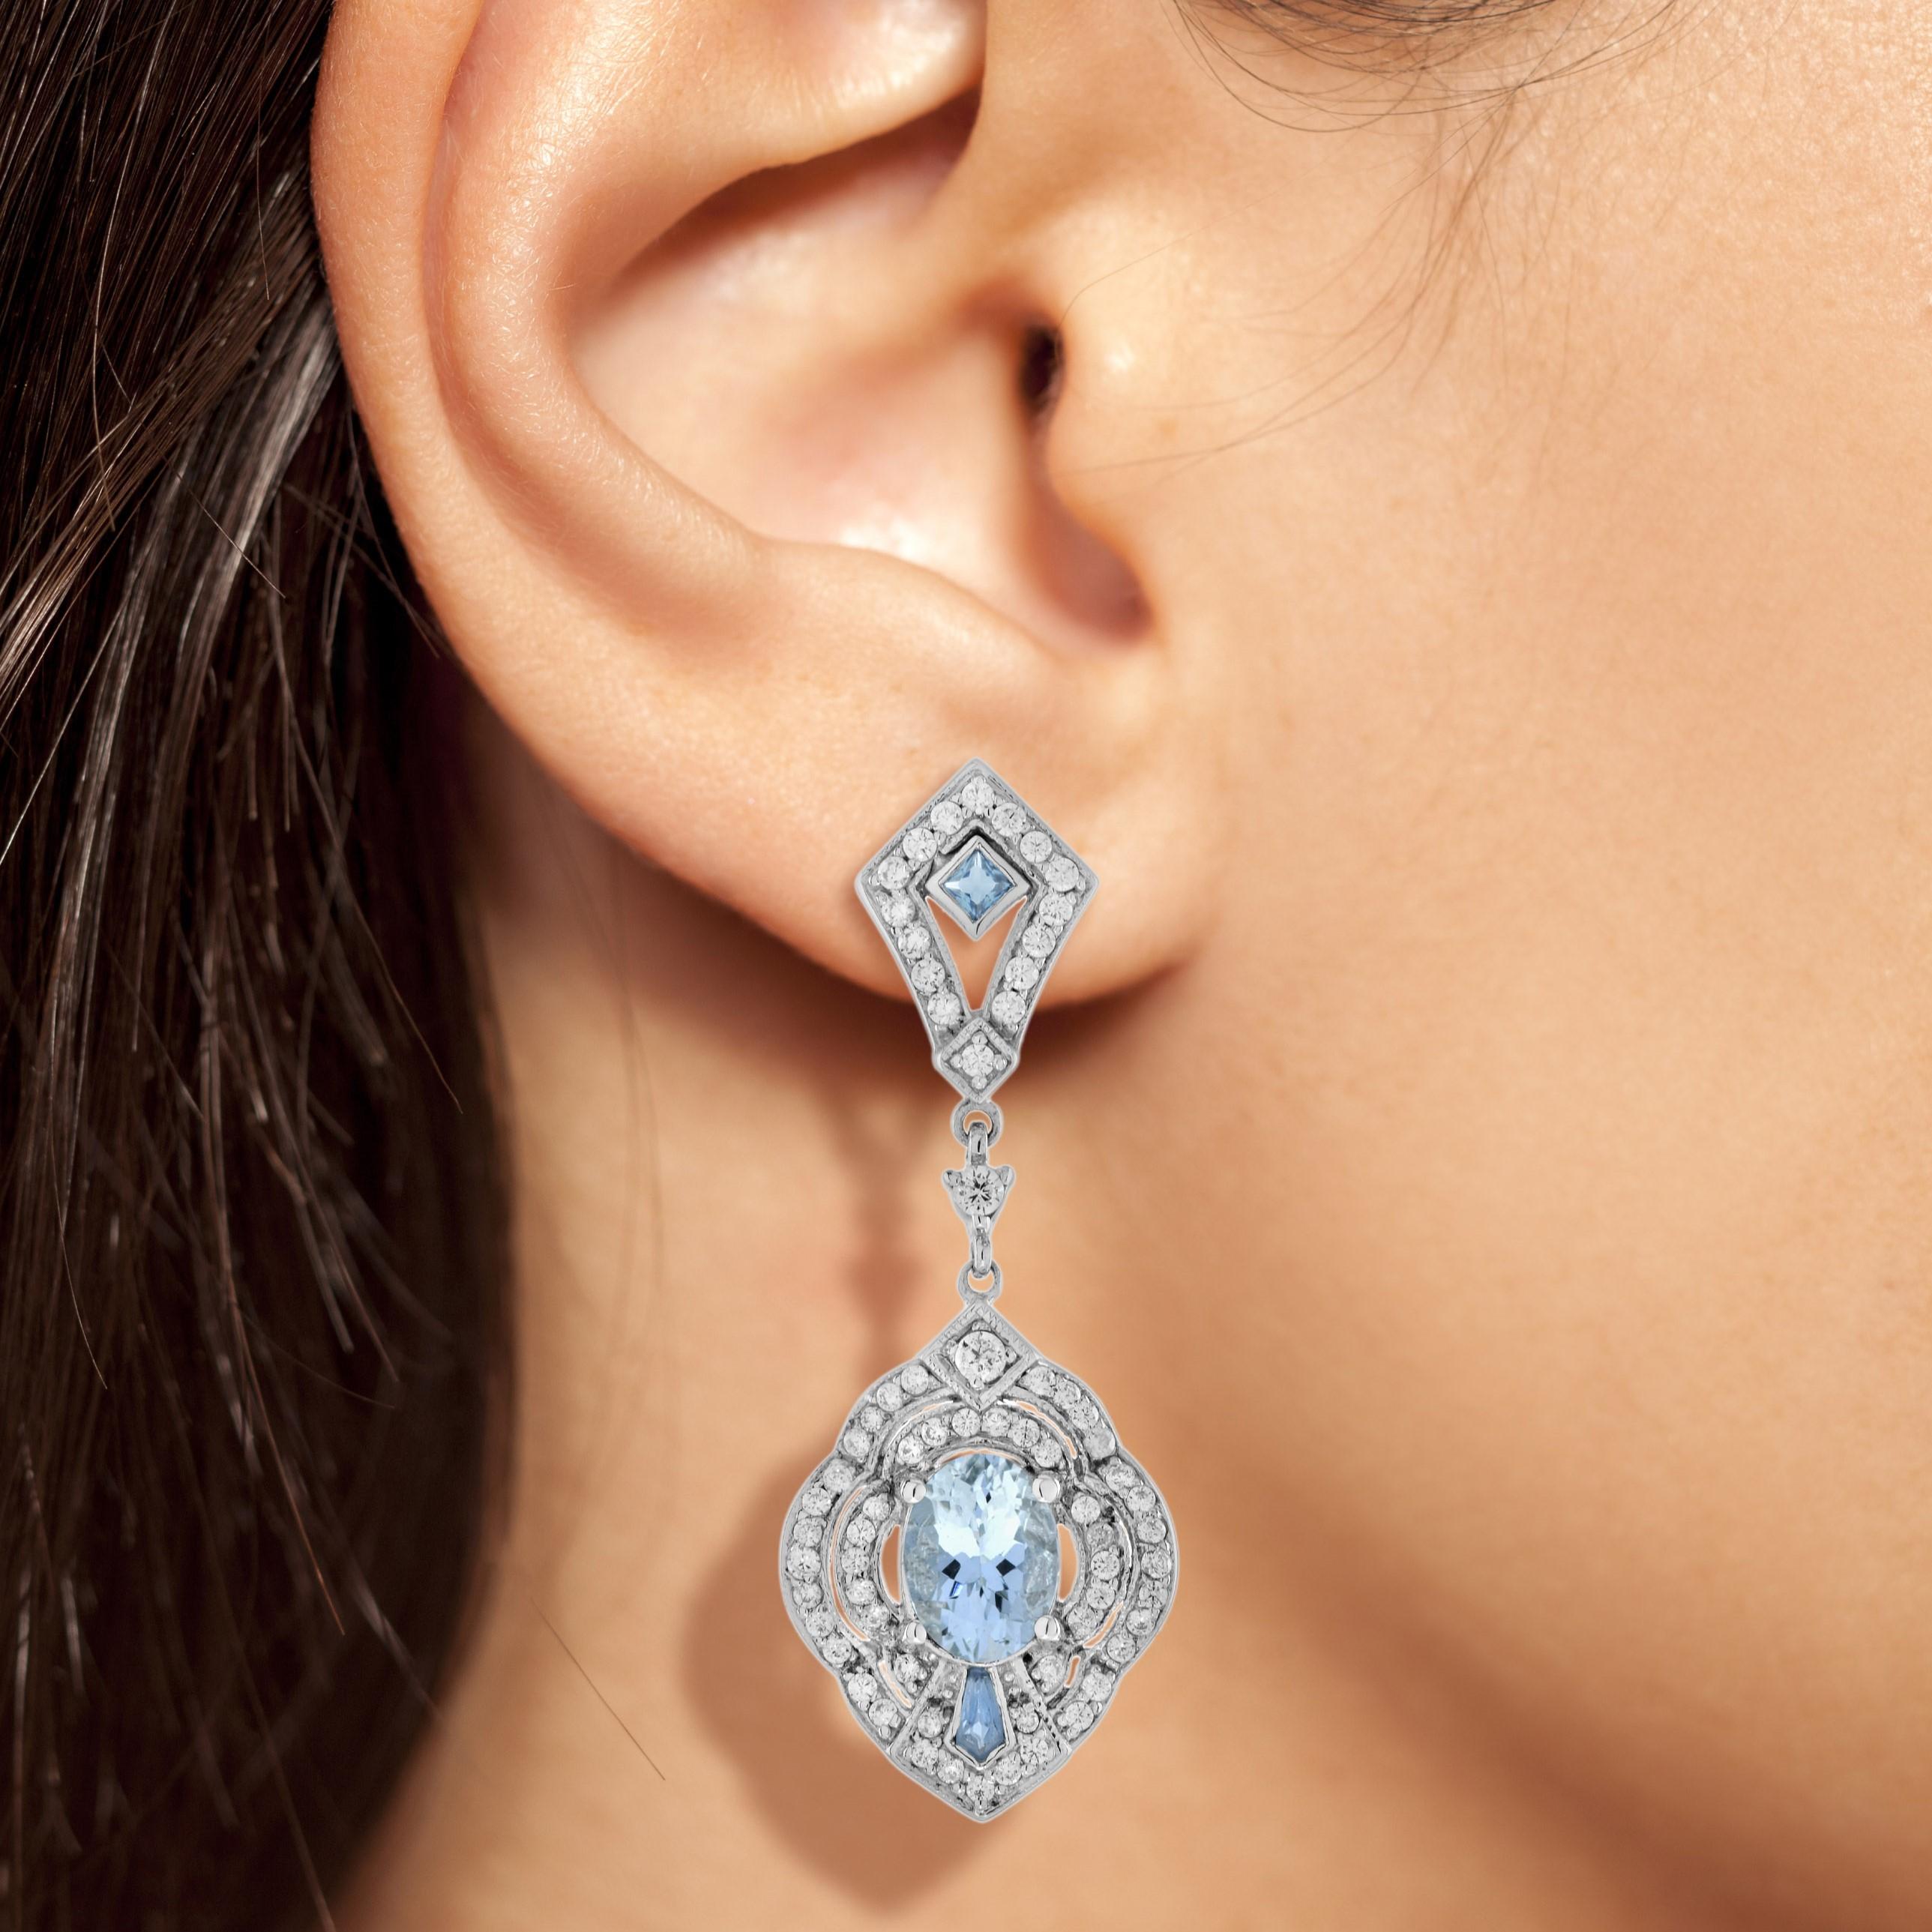 One of the most magnificent pair of aquamarine and diamond drop earrings from the Art Deco era inspiration. Exquisitely hand made in white gold, each earring is set with an approx. 3 carat oval shape aquamarine that stands out against both the